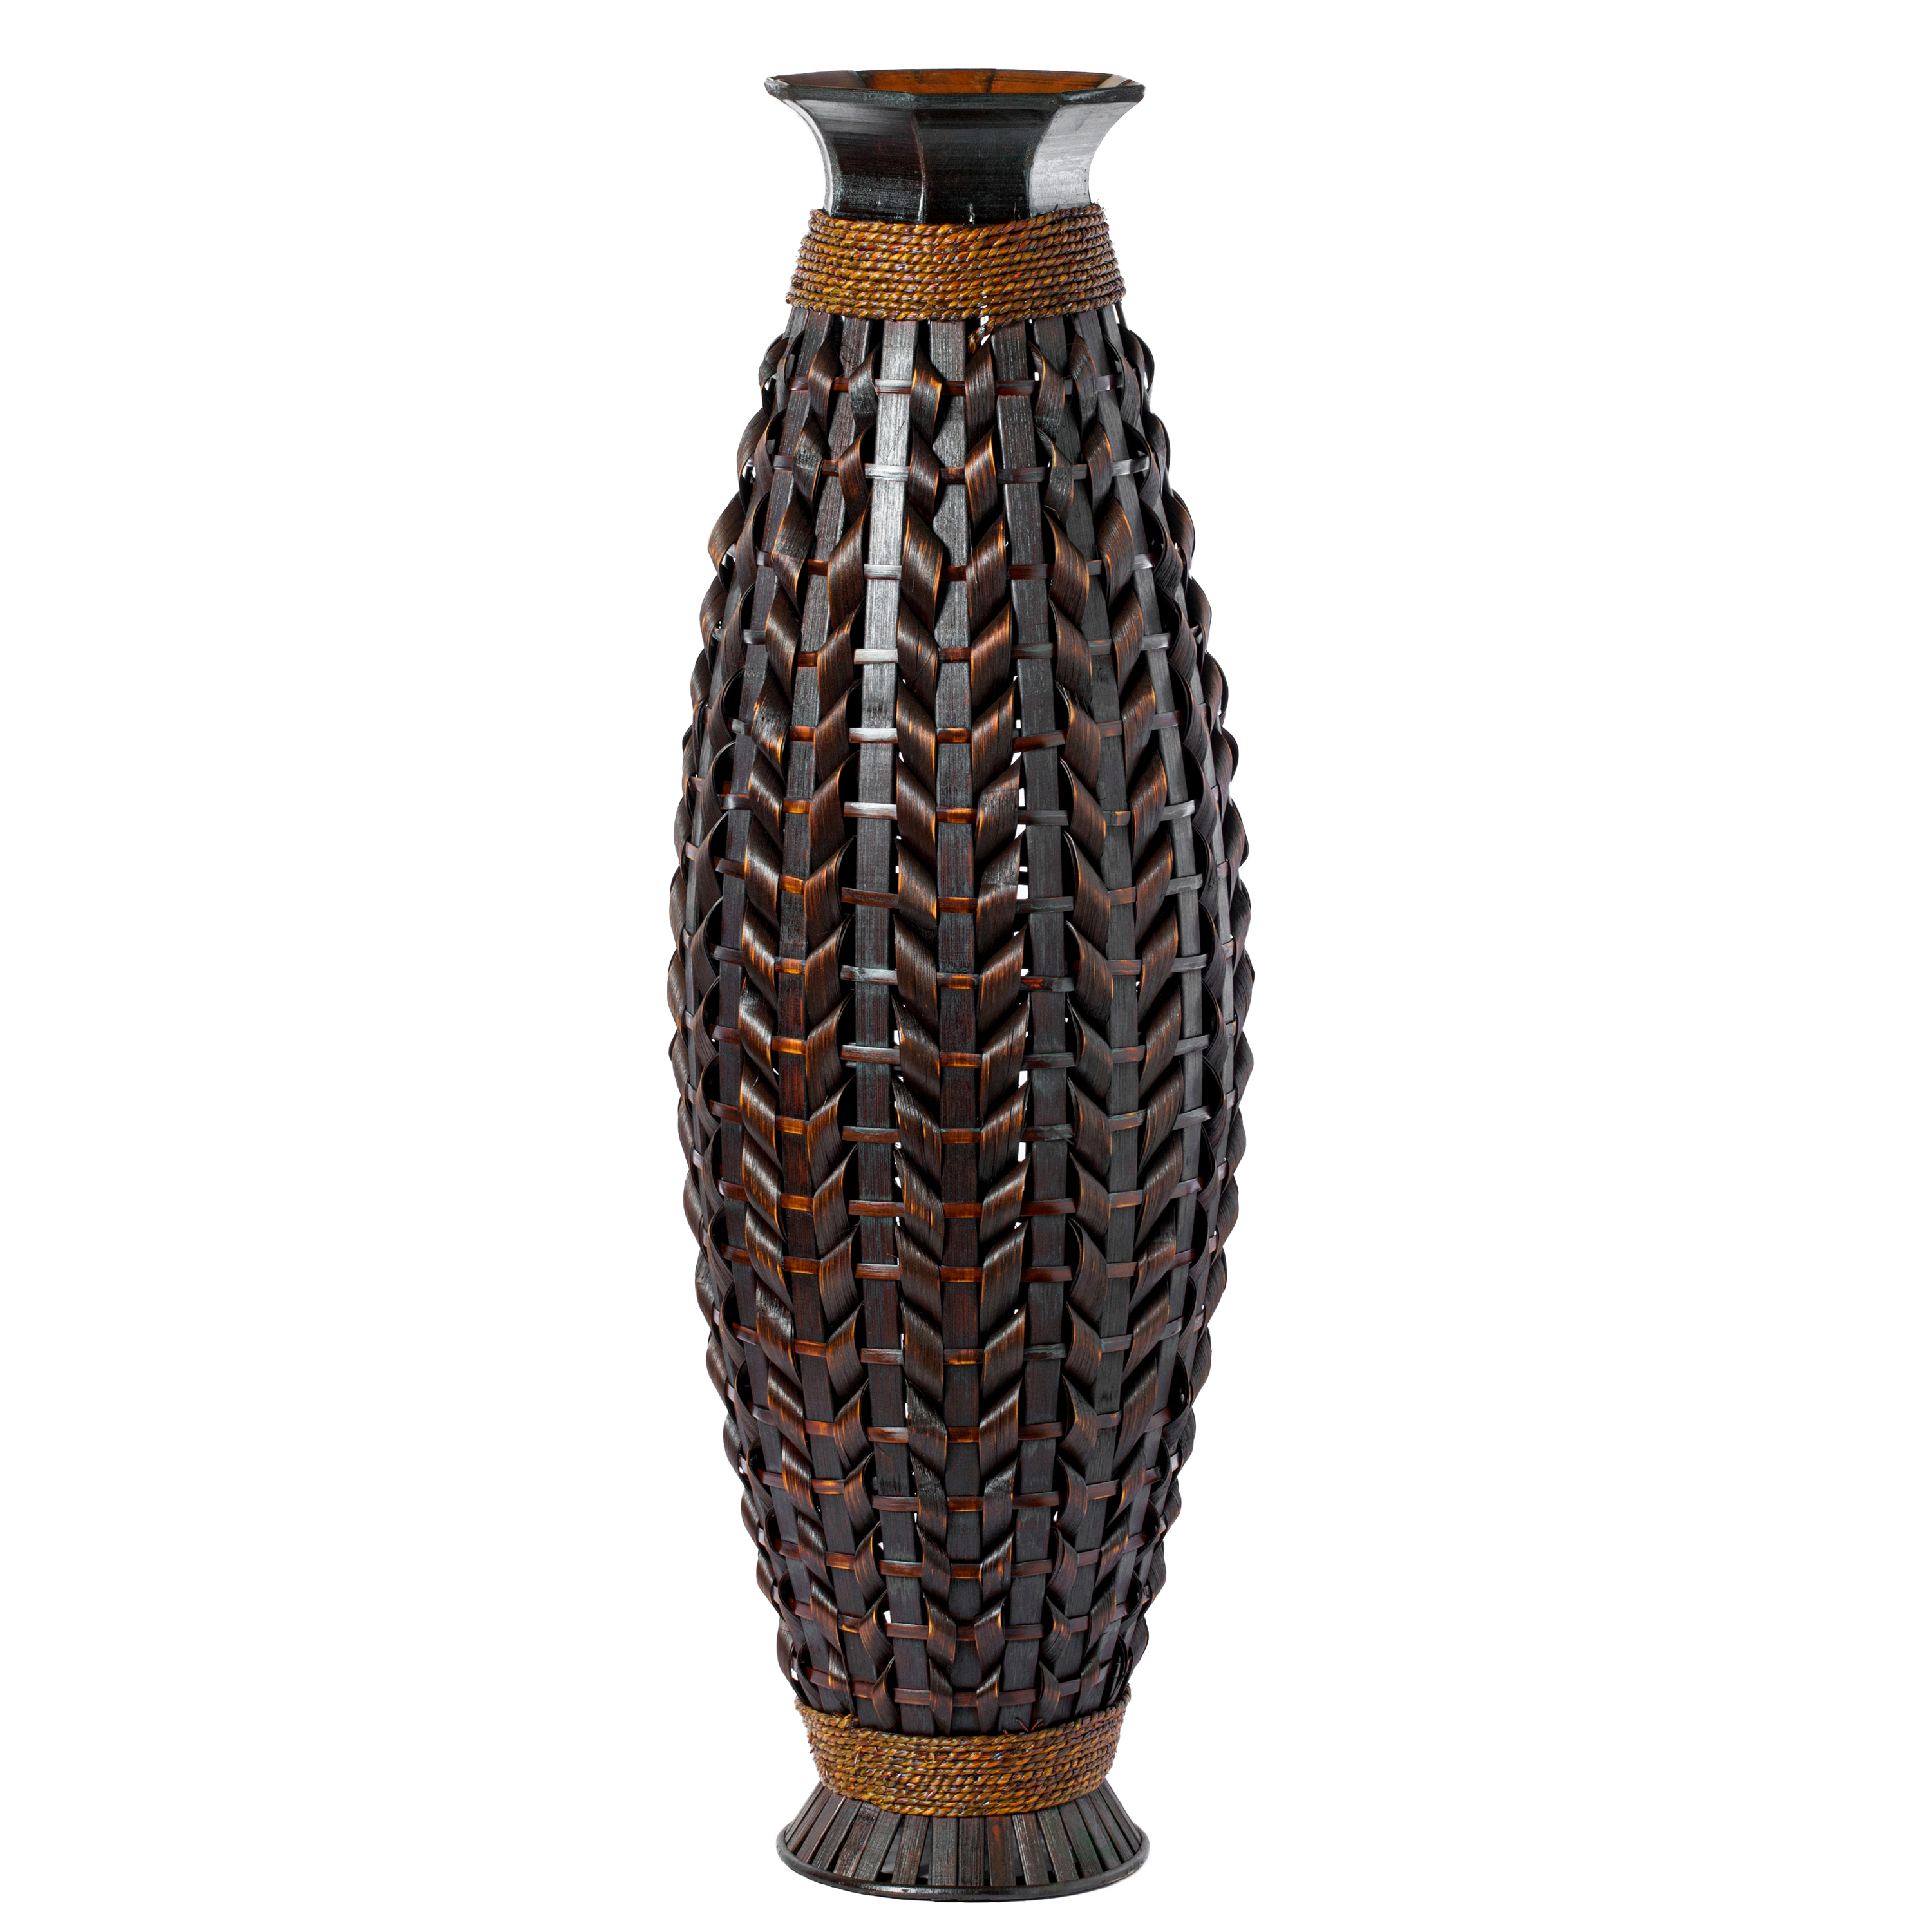 Tall Bamboo Floor Standing Vase With Wicker Woven Design 39 Inch High